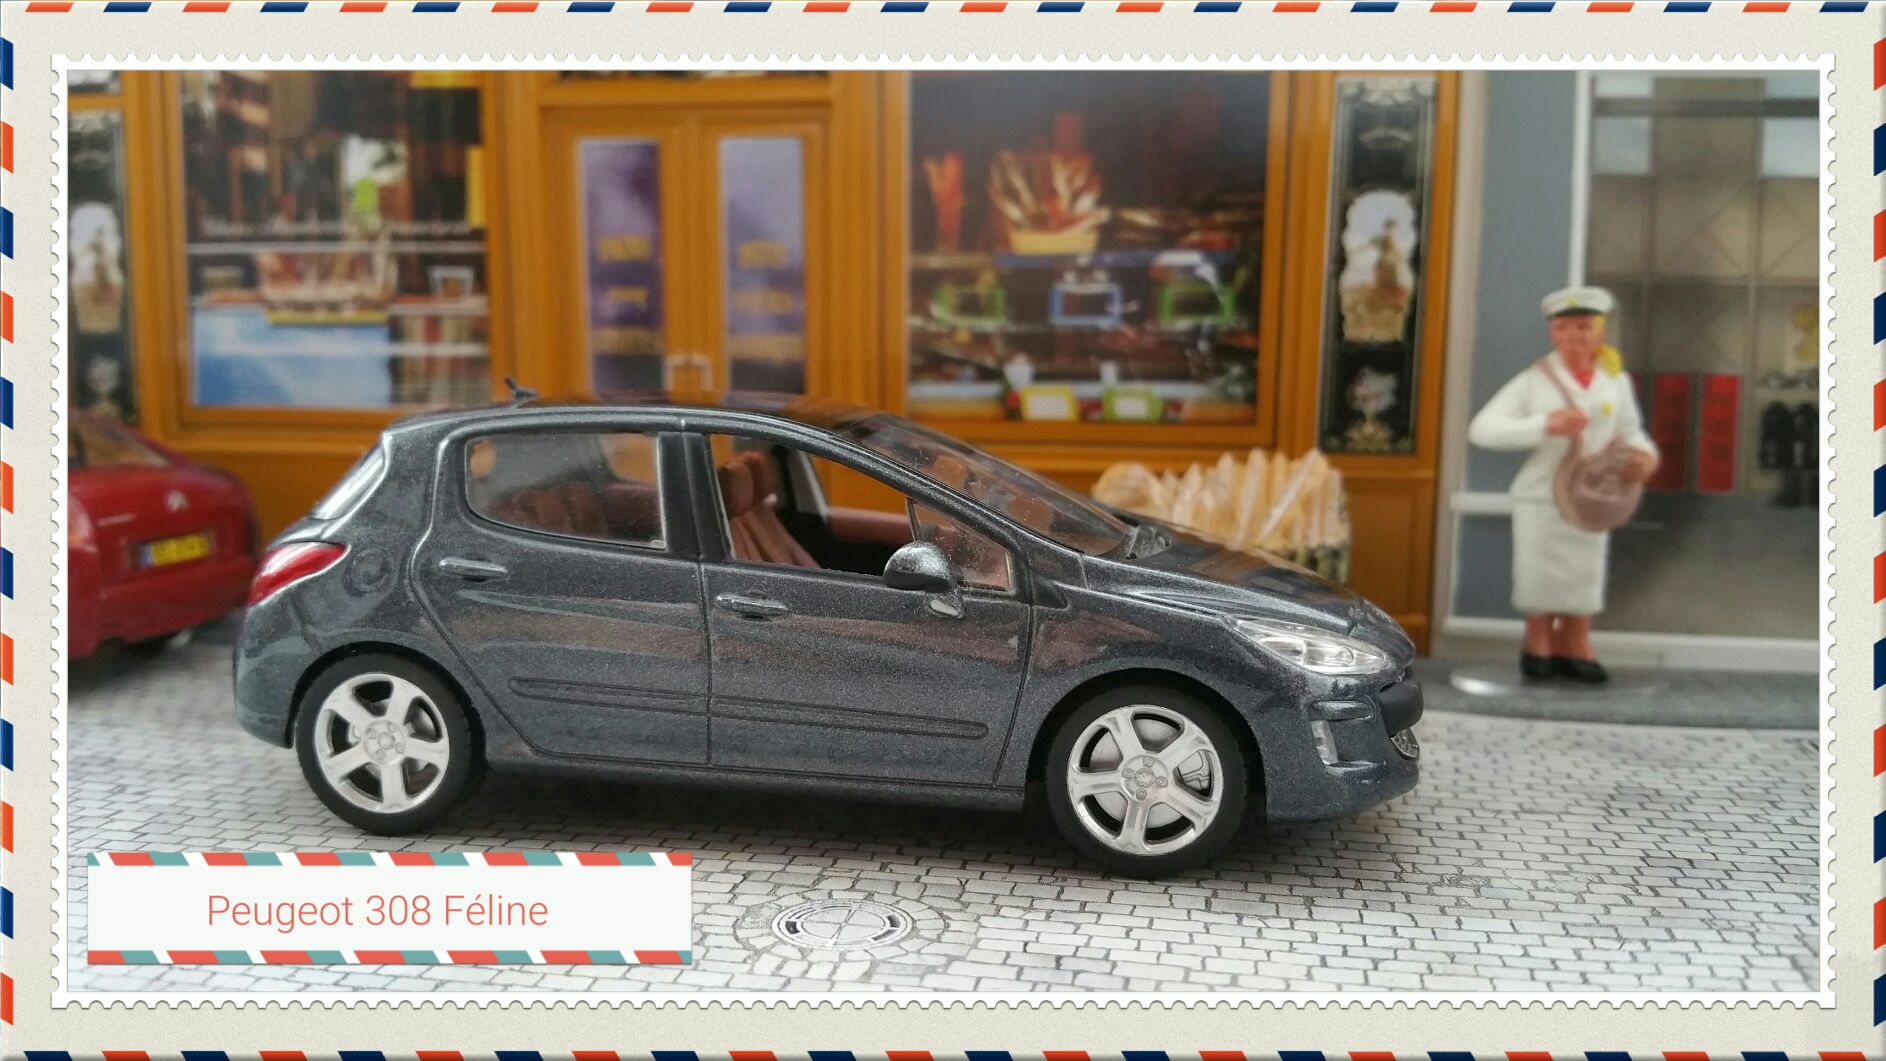 Peugeot 308 - Hors collection toy car collectible - Main Image 1